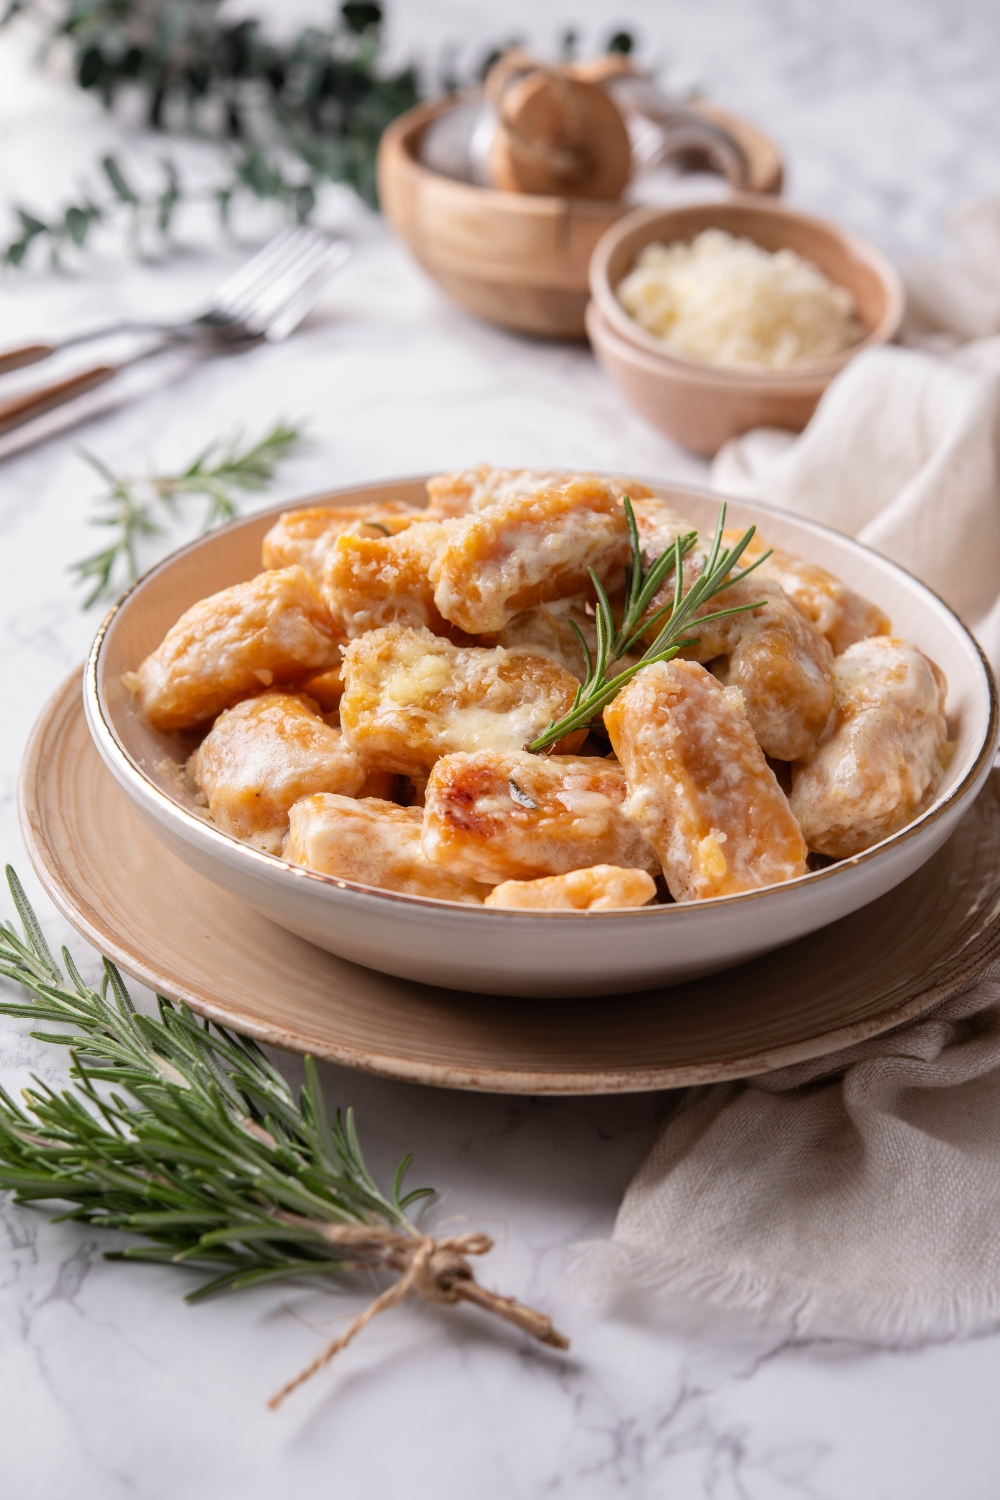 A bowl of sweet potato gnocchi covered in cream sauce with a sprig of rosemary garnished on top.